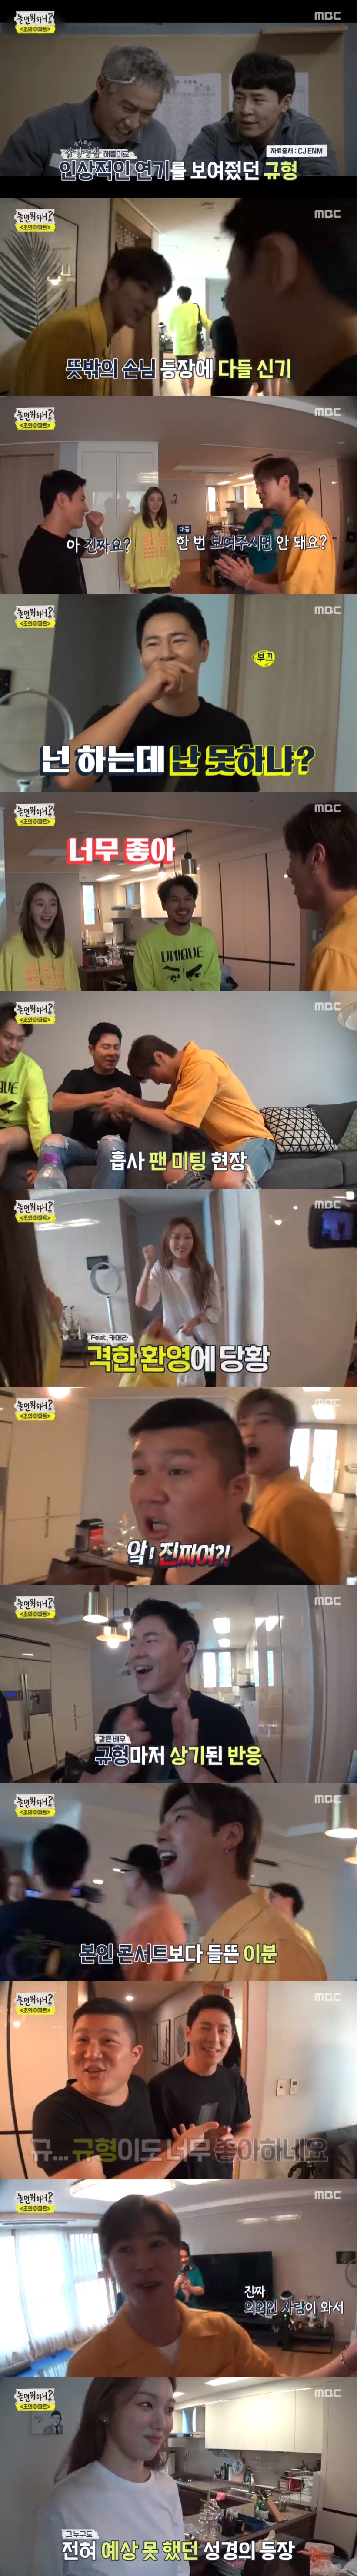 Seoul = = Hangout with Yoo featured unexpected characters, and all-time cheers came out.MBC Hangout with Yoo, which was broadcasted at 6:30 pm on the 17th, was shown in Lee Gyoo-hyeong and Lee Sung-kyung in turn.Existing performers Jo Se-ho and Yunho have been amazed at the appearance of Lee Gyoo-hyeong.Yunho responded that Lee Gyoo-hyeong responded to the TVN drama Spicy Relief Life when he said, Why can not I do it?Yunho also genuinely welcomed Lee Gyoo-hyeong by shaking hands.Lee Sung-kyung followed up, cheering all on the appearance of Lee Sung-kyung, who had a relationship with Taehangho for drama.Jo Se-ho laughed and said, (Lee) Gyu-hyung also likes it.Yoo Jae-Suk also said, I did not know the Bible would come, and Yunho also said, I was glad that an unexpected person came.Yoo Jae-Suk said, I am alive because I have all of you on camera.